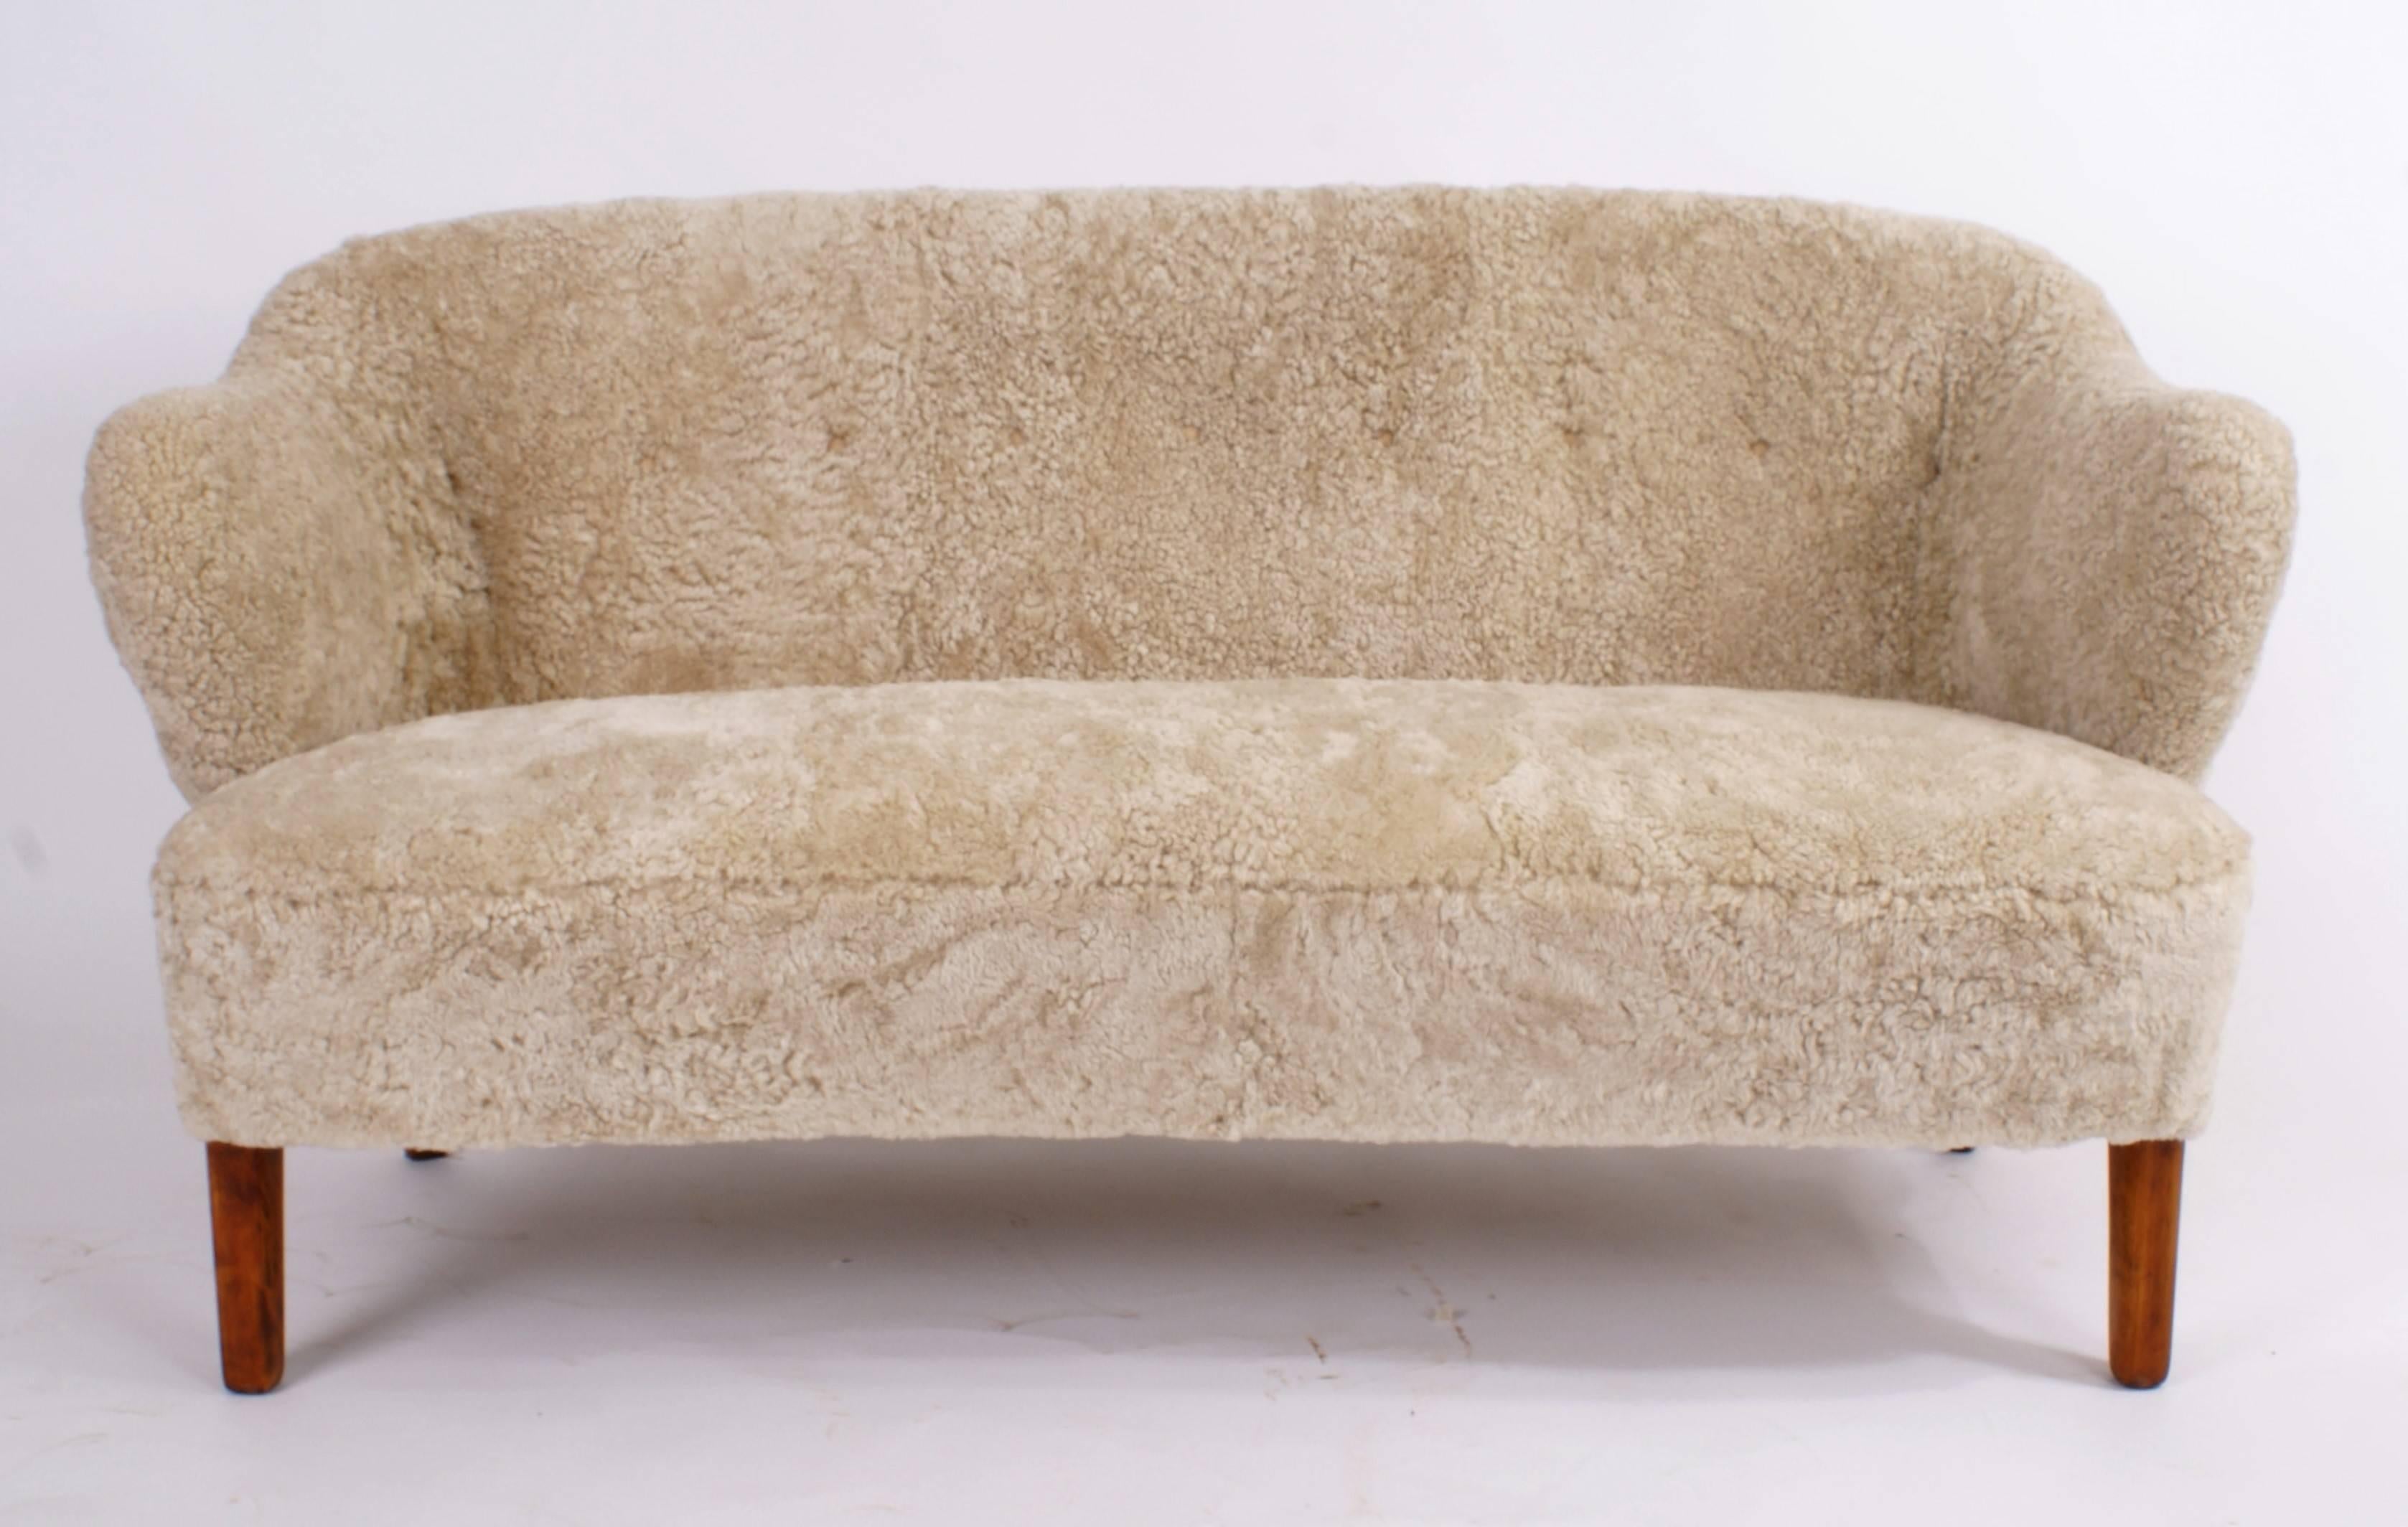 Flemming Lassen, two-seat settee for master cabinetmaker Jacob Kjær, Copenhagen. Beige sheepskin upholstery and ash legs. Designed, 1940.

Please view 1stdibs item reference number LU1081216152511 for a pair of Flemming Lassen easy chairs that match